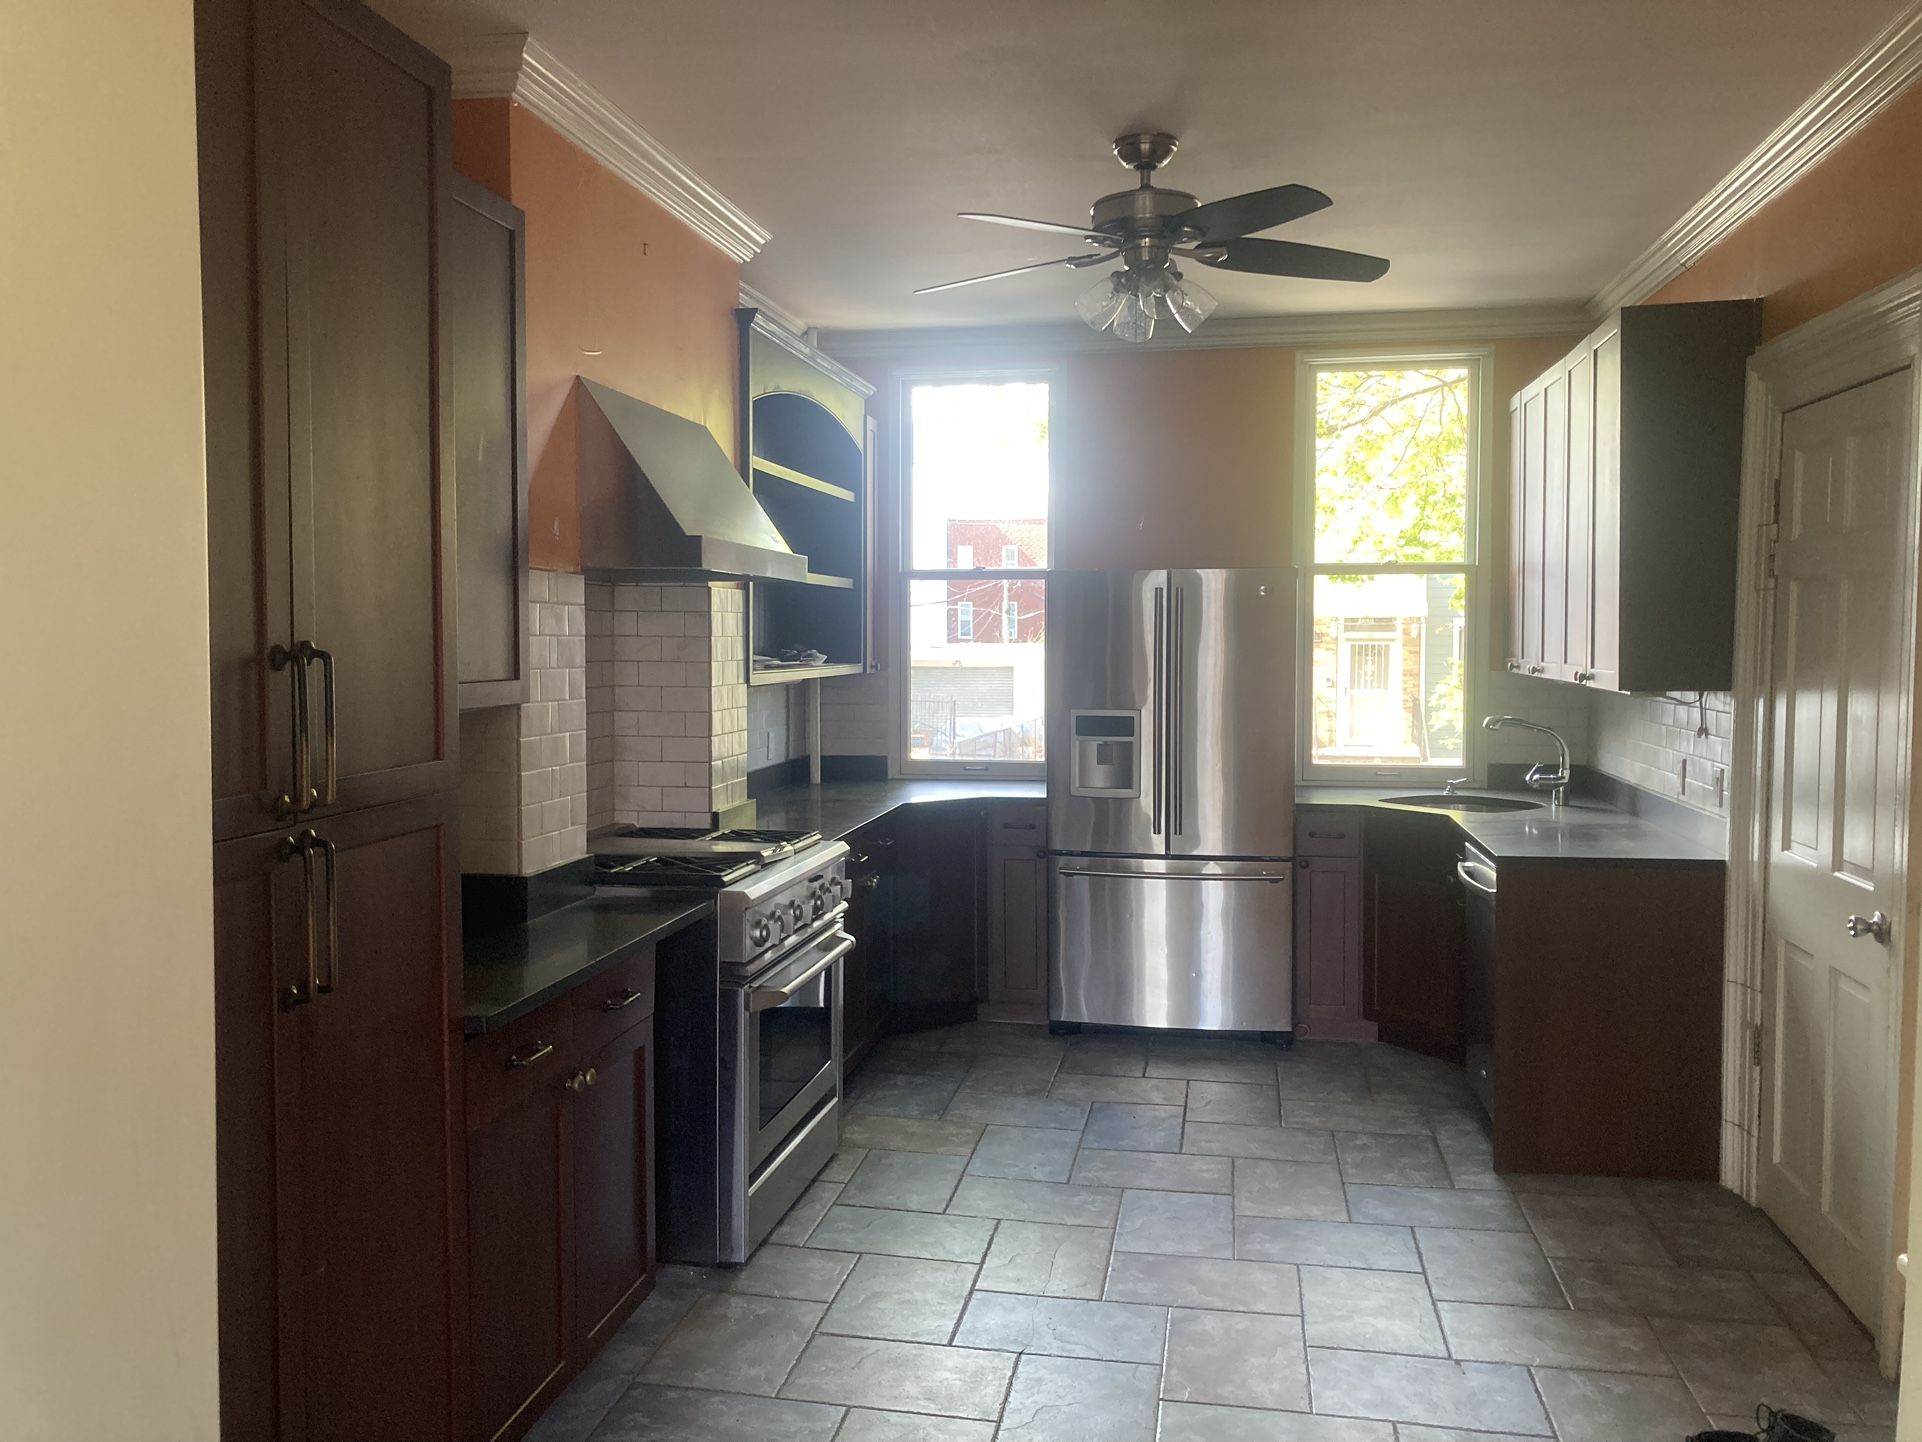 Fully Functional Kitchen Available for Pickup - $3000 (Moving Out)